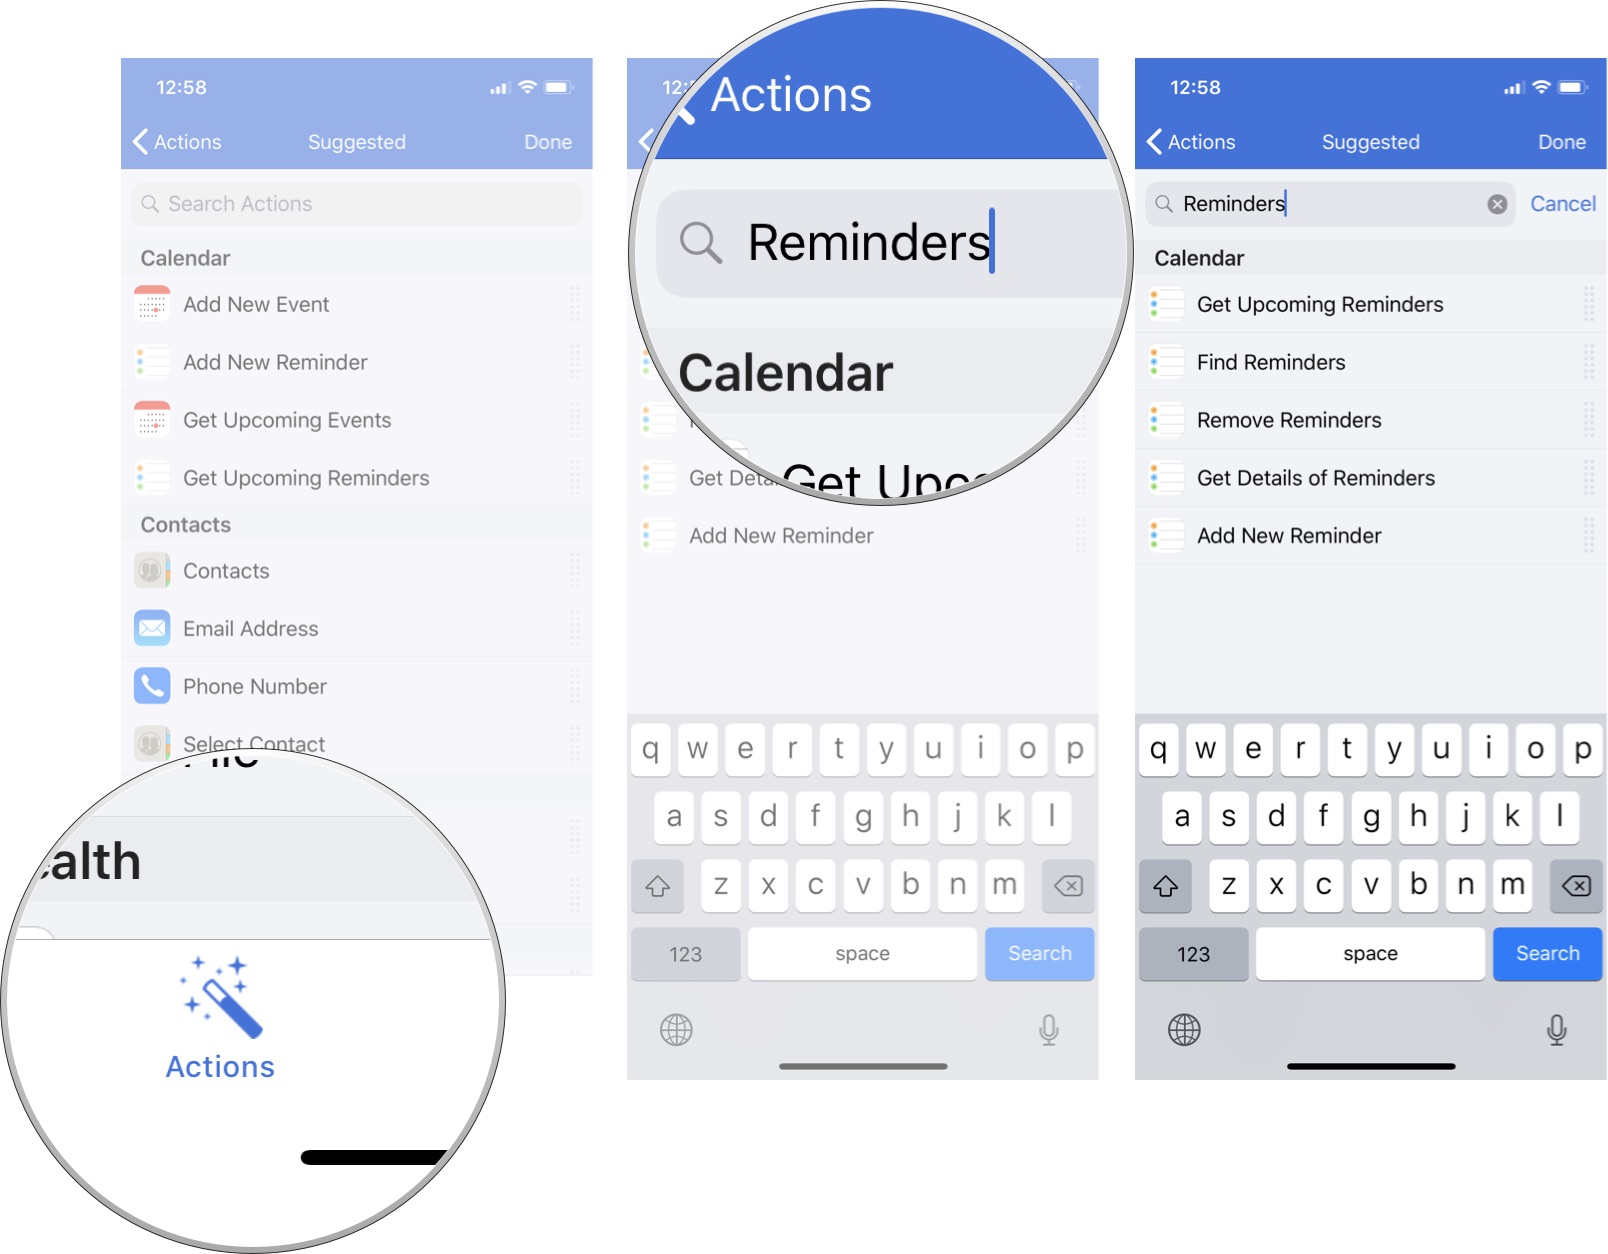 Tap Actions, then search for Reminders, then select the action